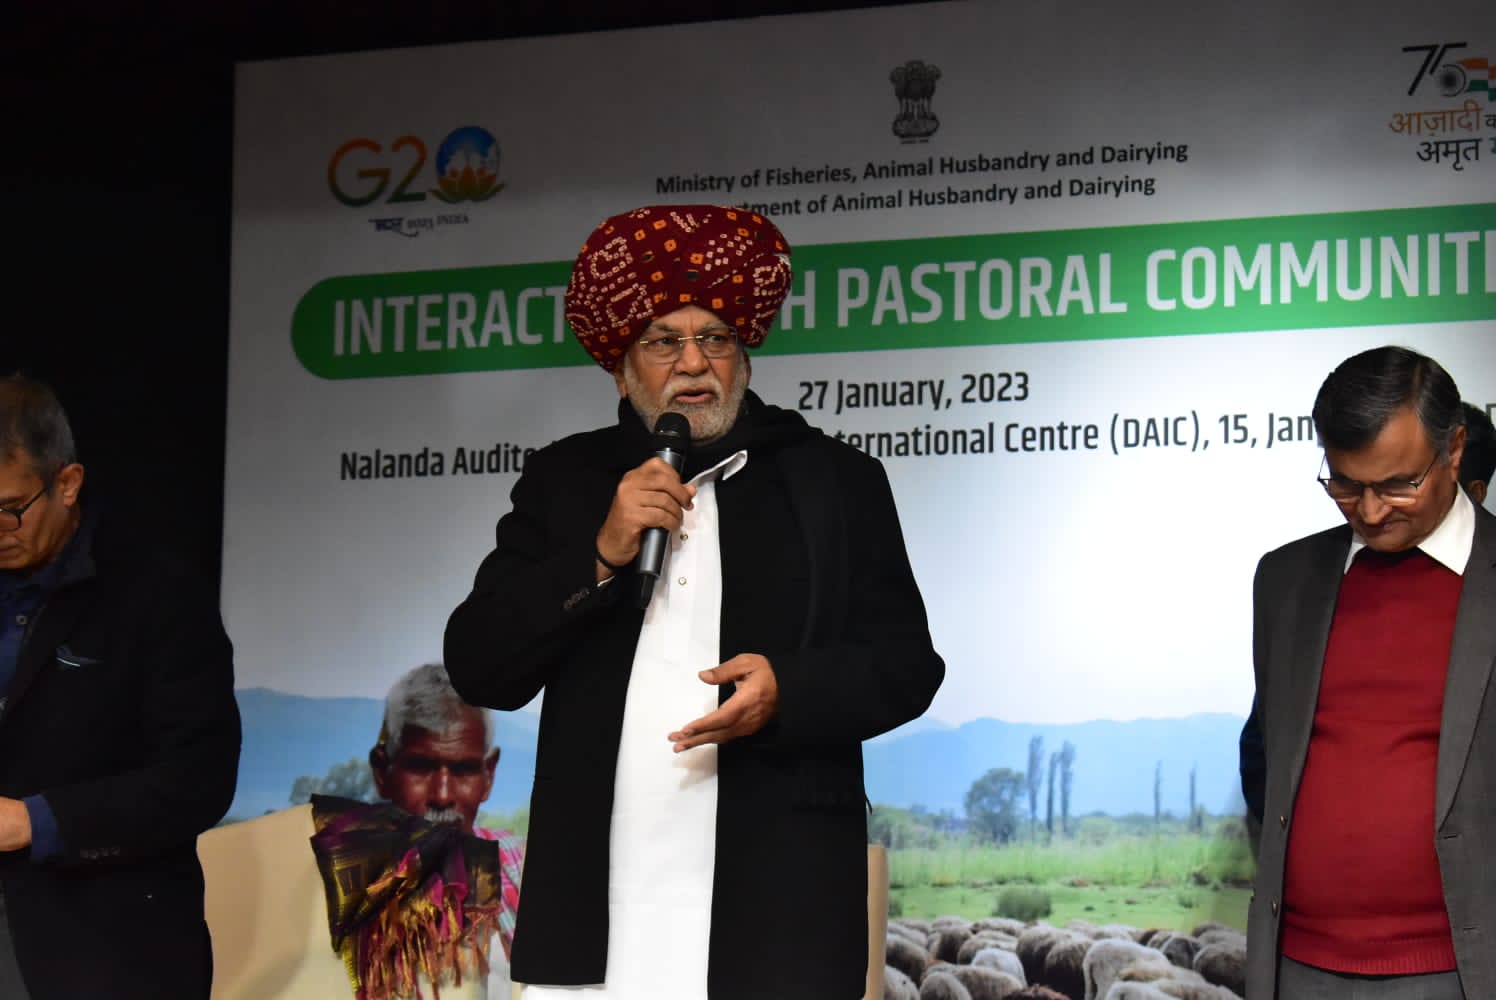 You are currently viewing Interaction Takes Place Between Union Minister Parshottam Rupala And Pastoral Communities From Across The Country